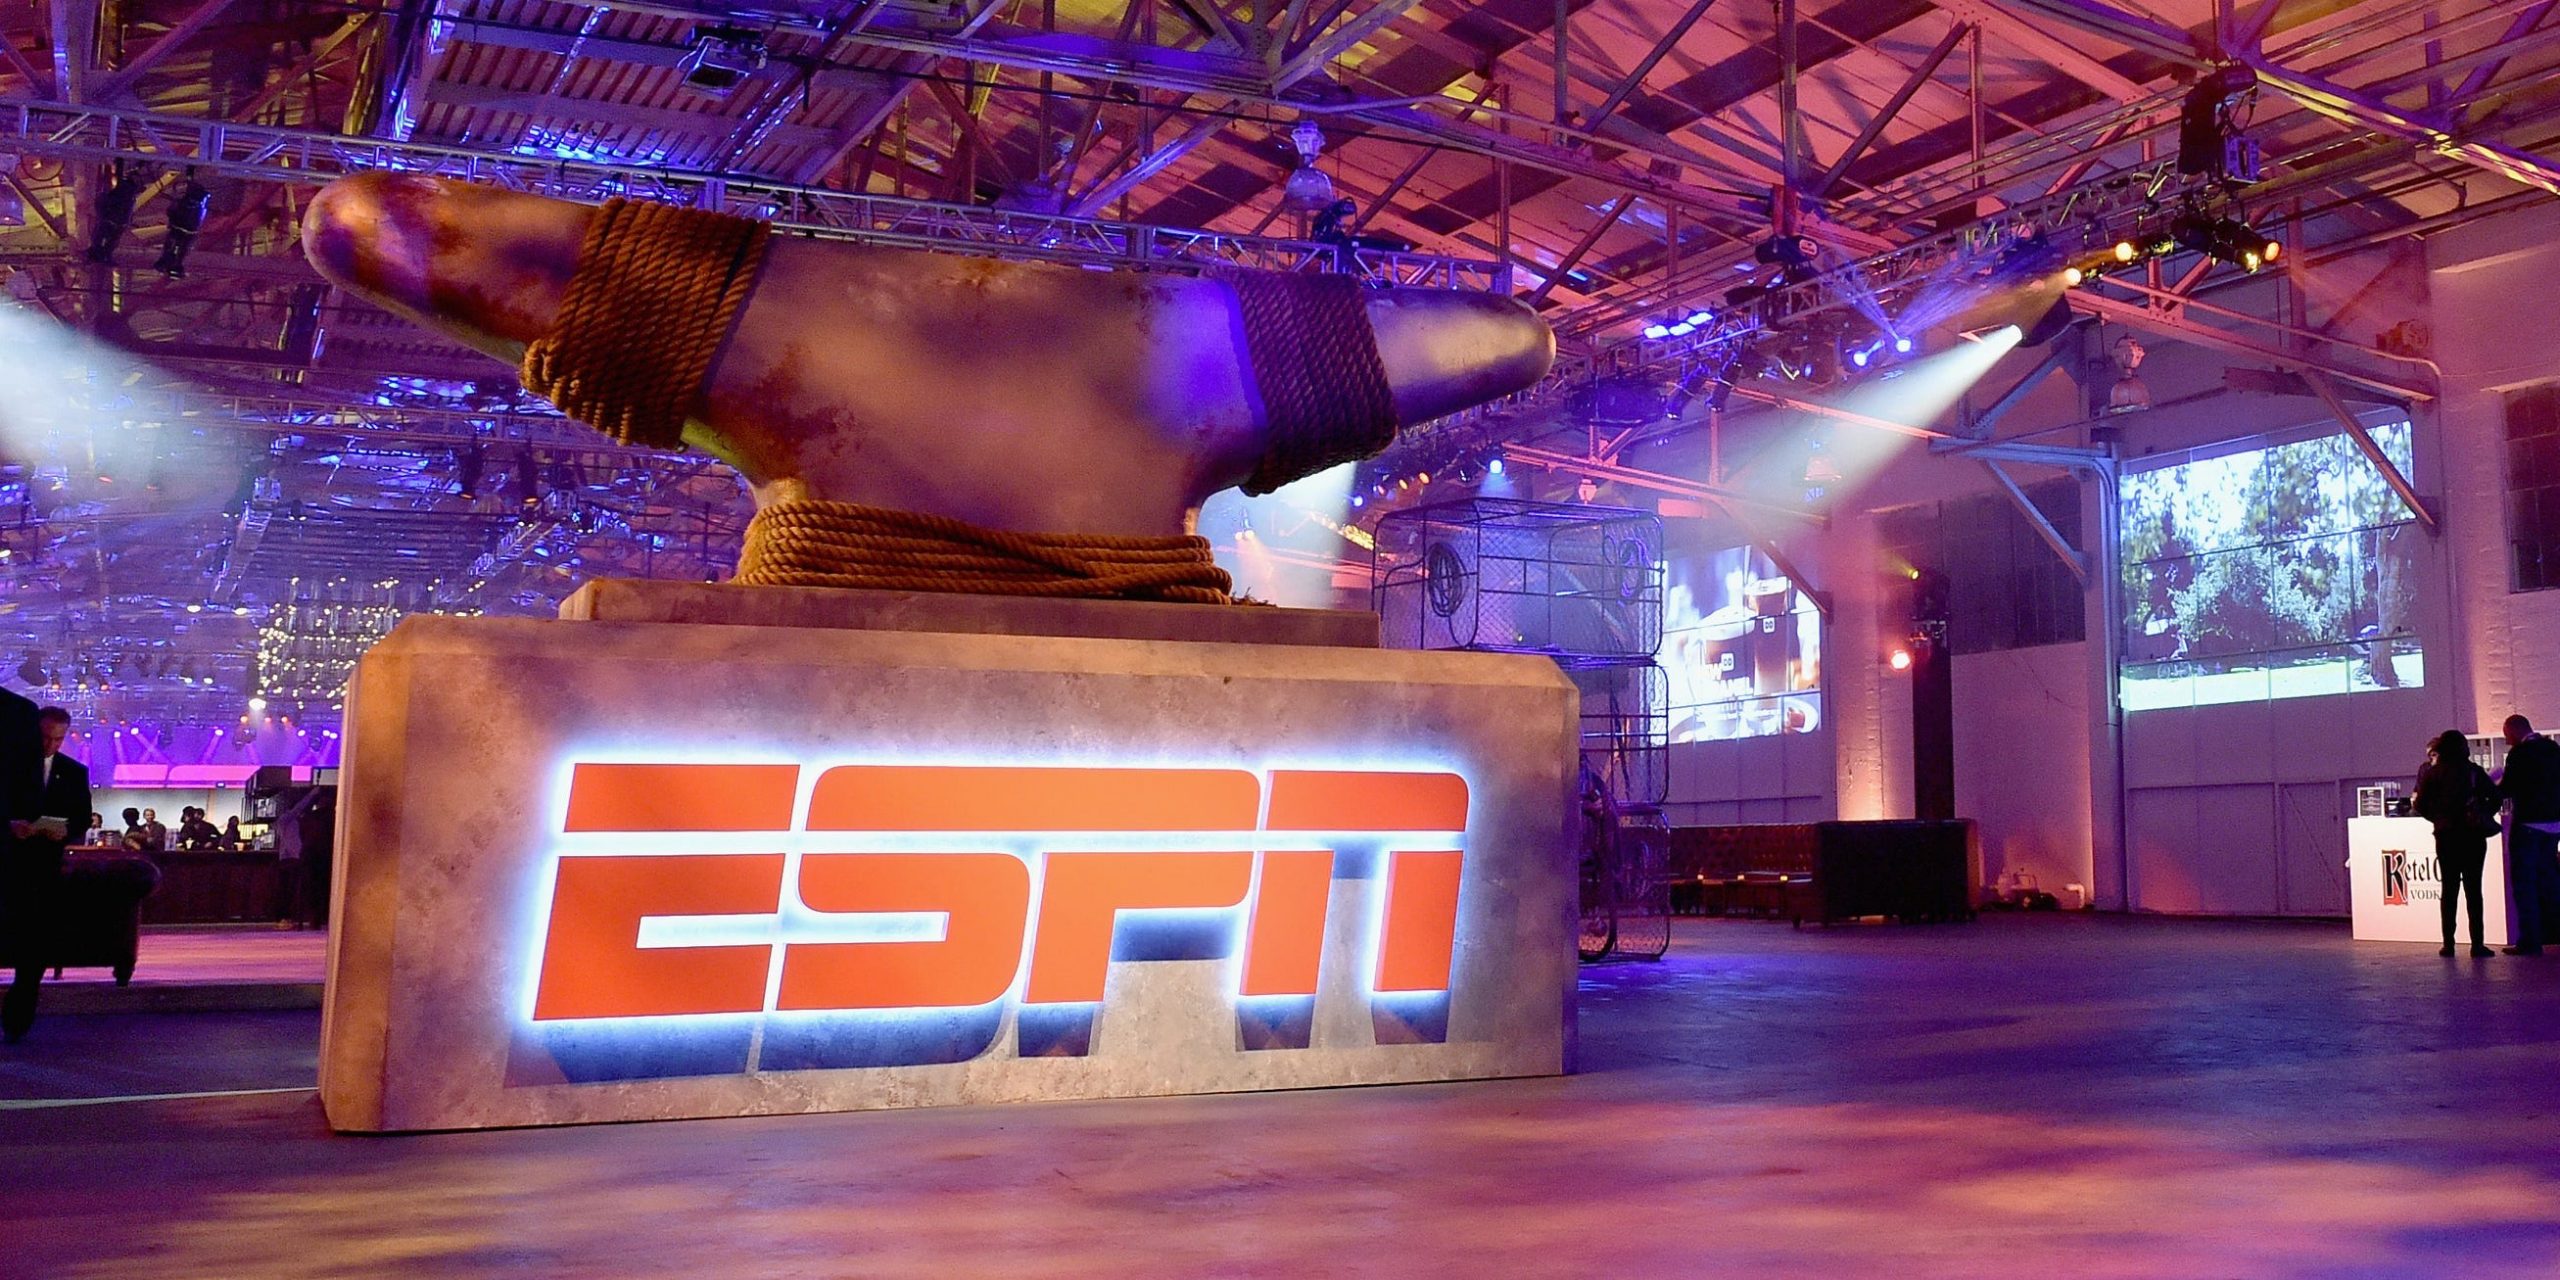 A view of the logo during ESPN The Party on February 5, 2016 in San Francisco, California.